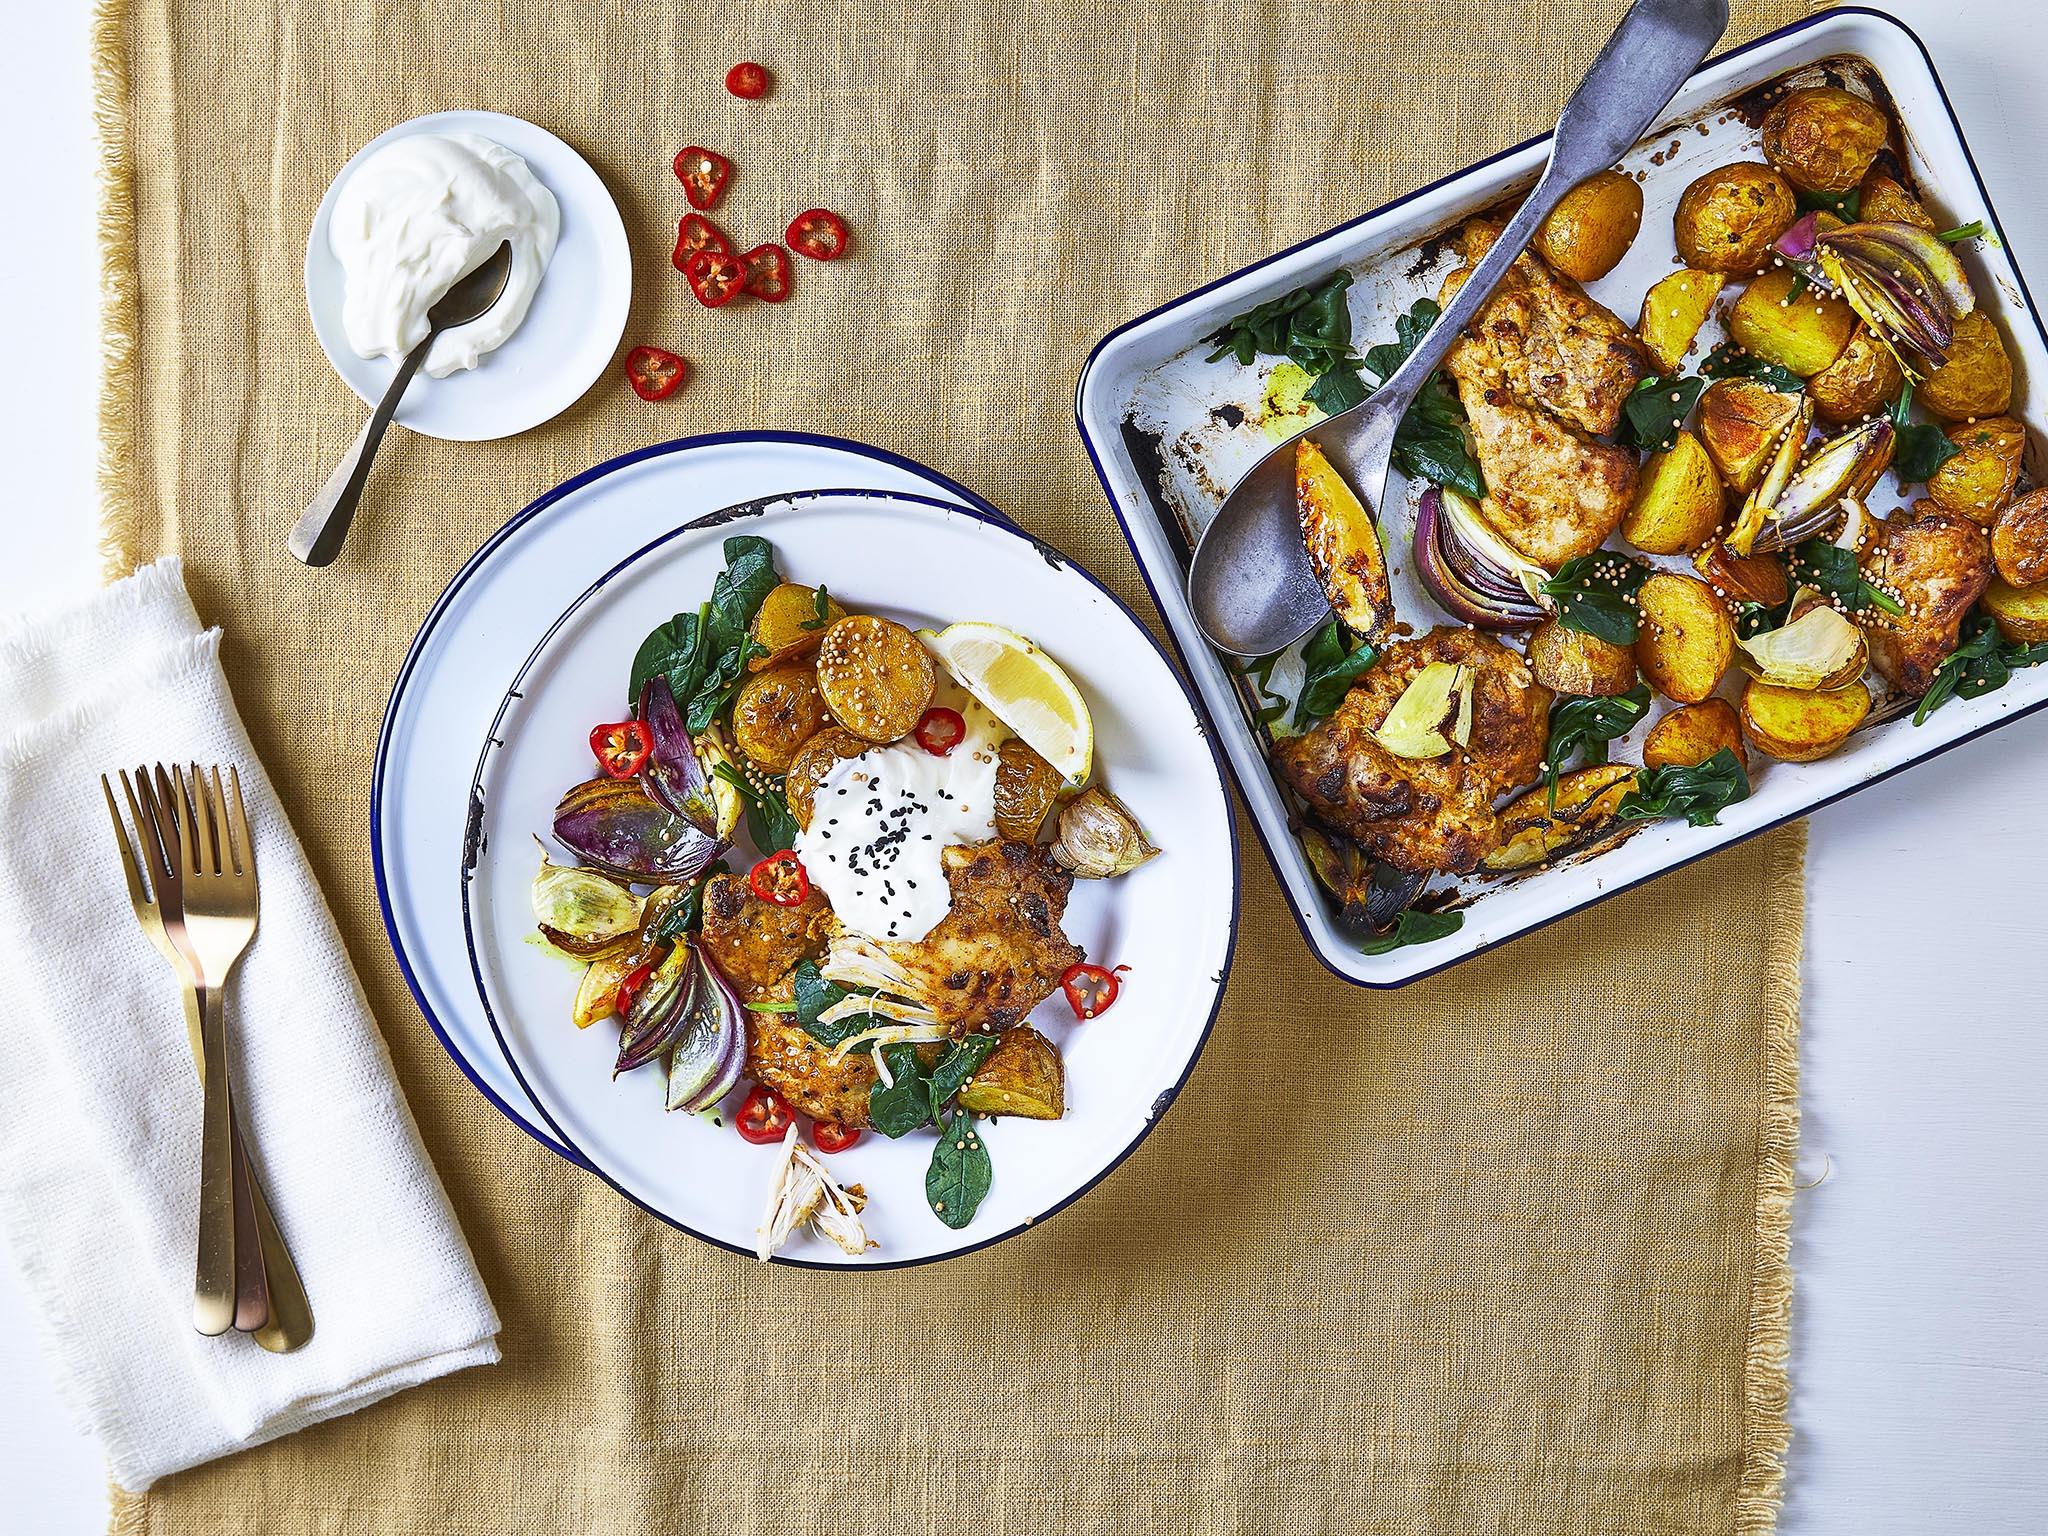 How to make Indian traybake chicken with spinach | The Independent ...